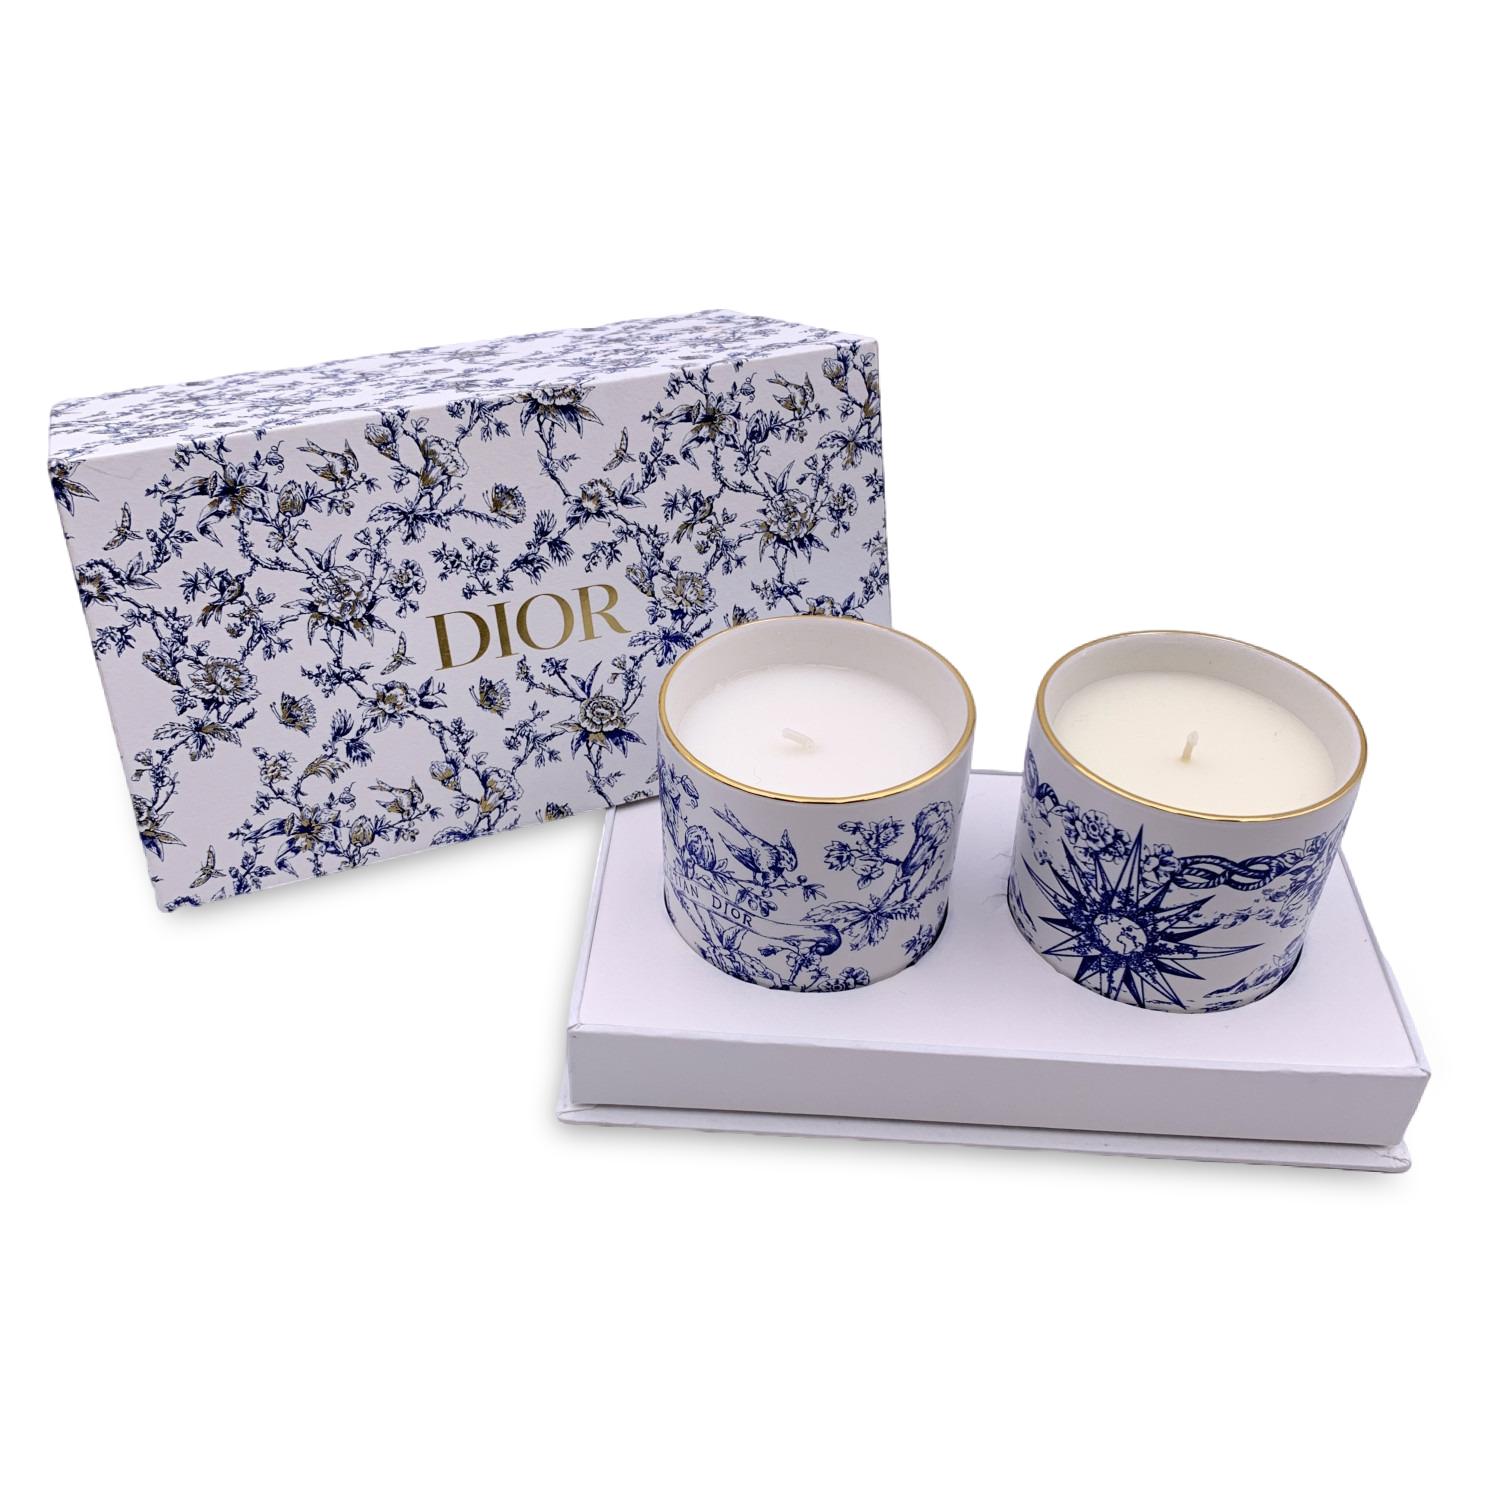 Beautiful Christian Dior mini scented candle set. The set consists of two porcelain candles with blue and white decorations, embellished with golden trim on top. Orange Canelle and Sapin Cypres scents. Made in France. Dimensions: 2.75 x 3 inches - 7